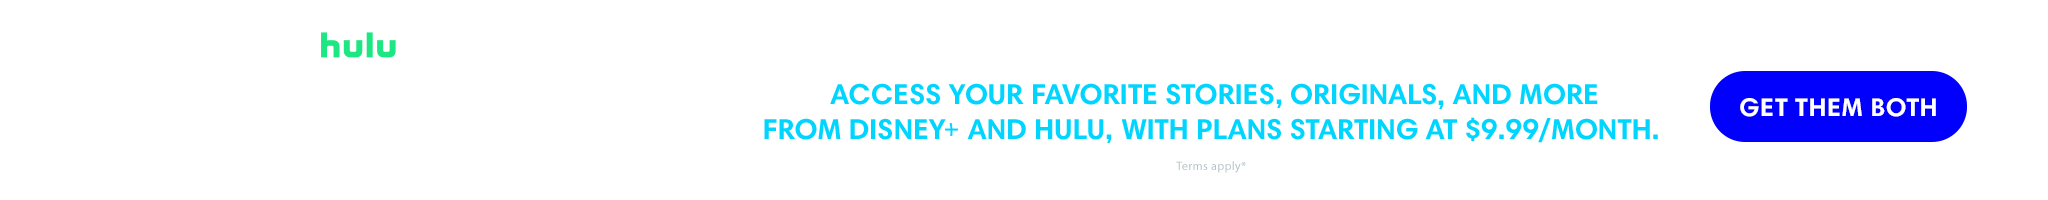 Hulu | Disney+ | Disney Bundle | Access your favorite stories, Originals, and more from Disney+ and Hulu, with plans starting at $9.99/month. | Get them both. | Terms apply*